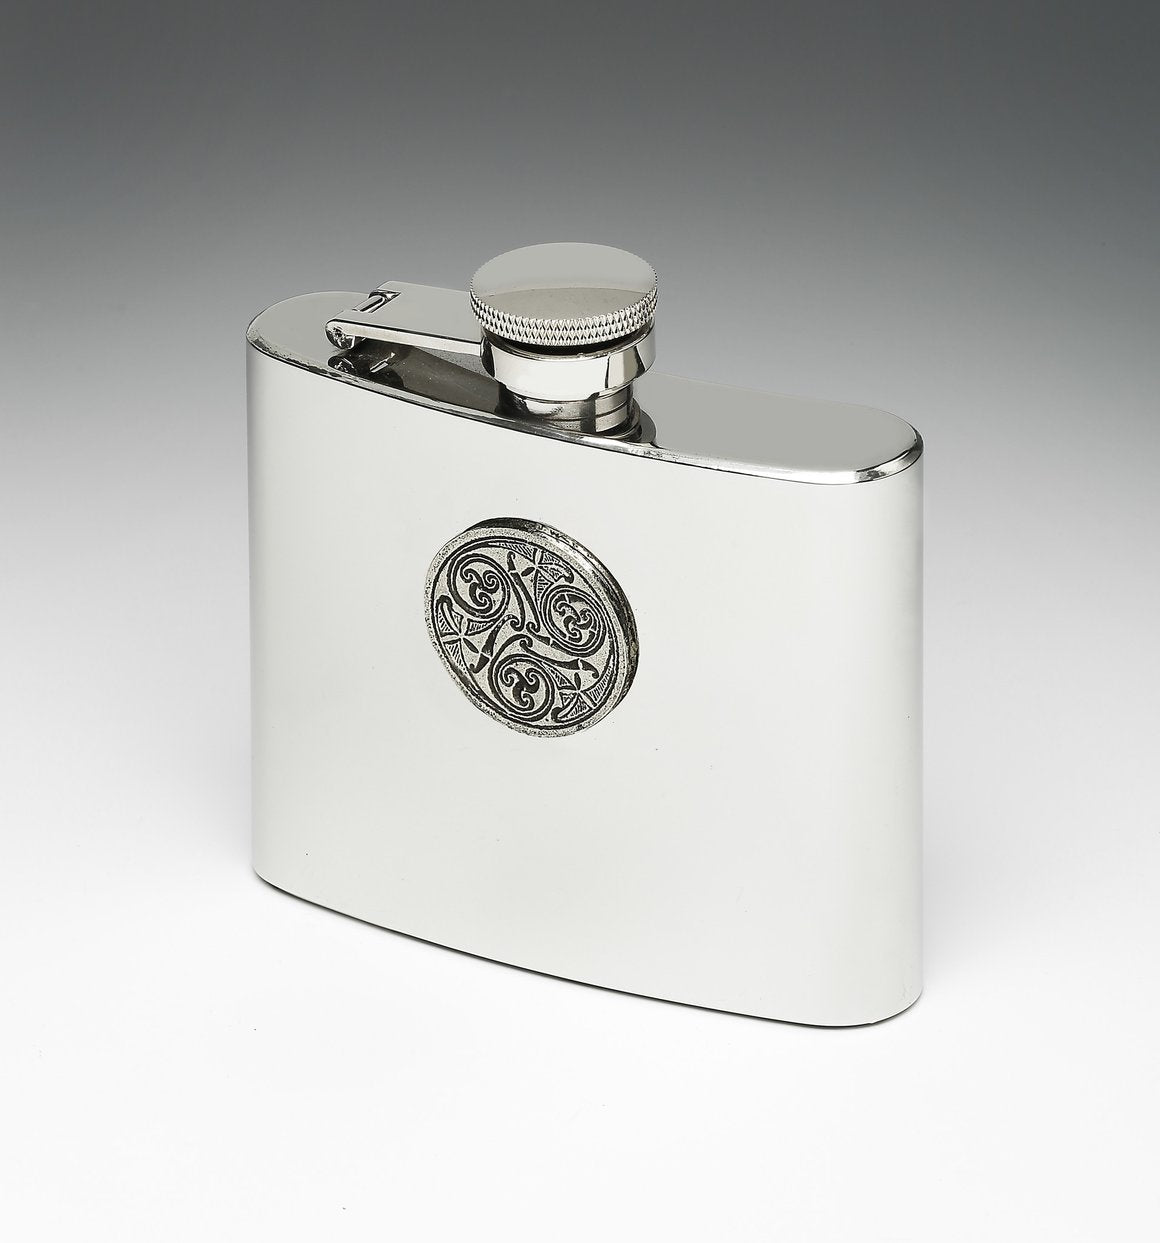 Whiskey Hip Flask with Celtic Spirals Design by Mullingar Pewter